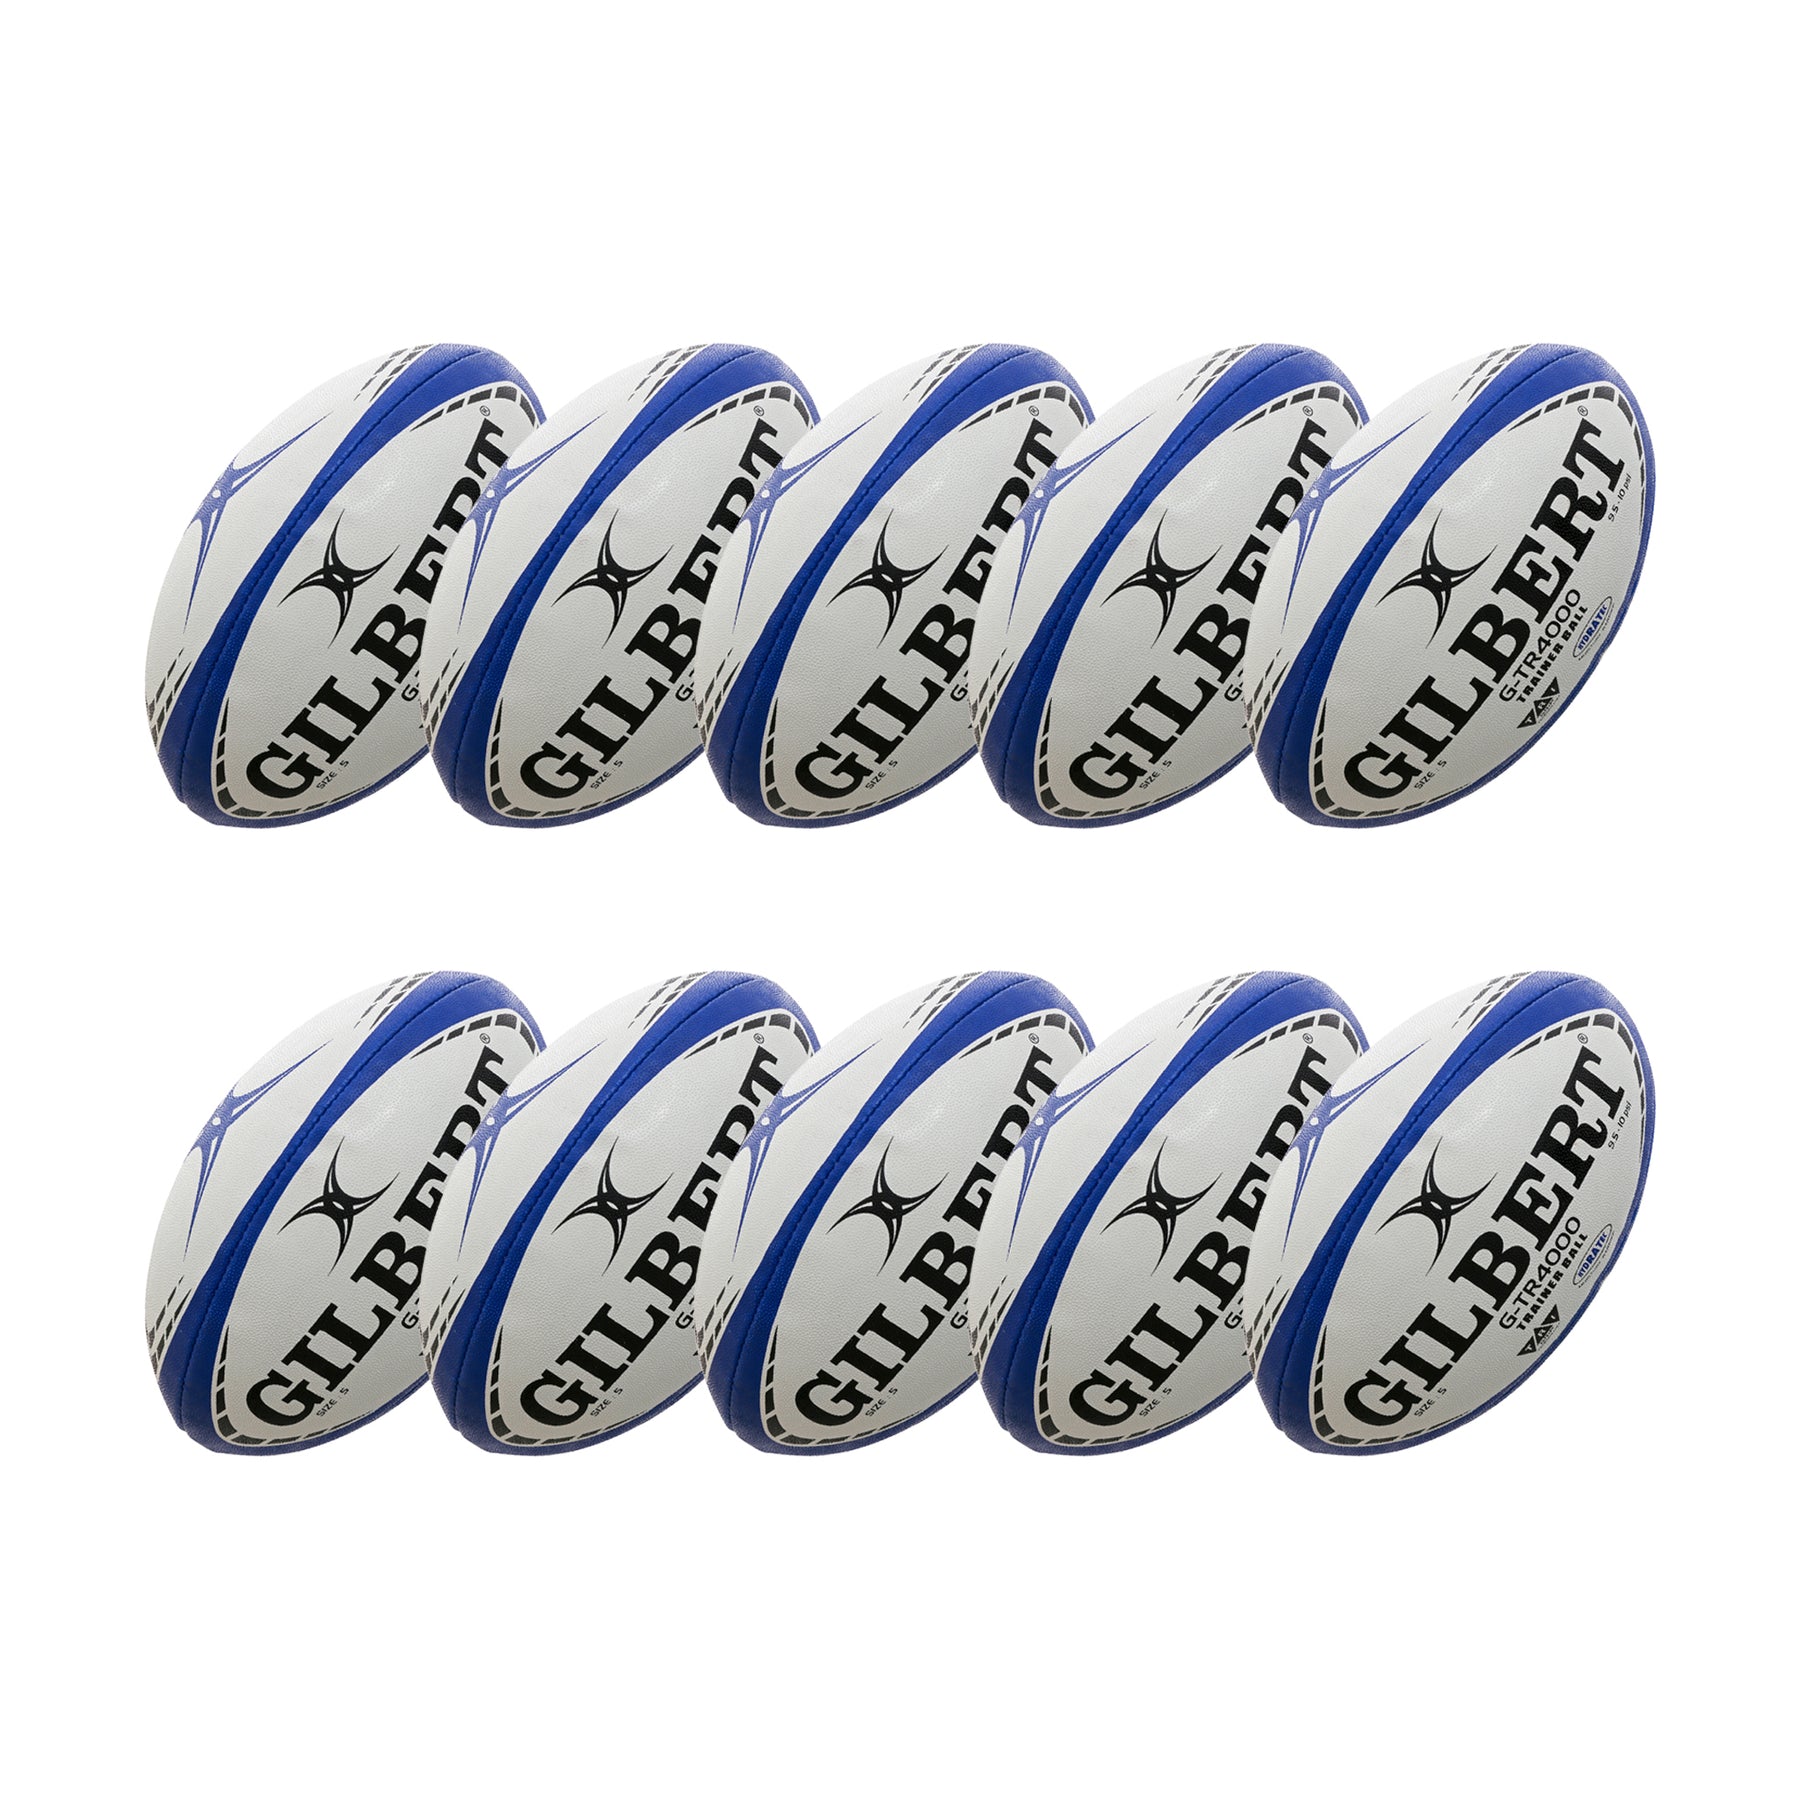 Gilbert G-TR4000 Training Rugby Ball - Size 4 (Pack 10)